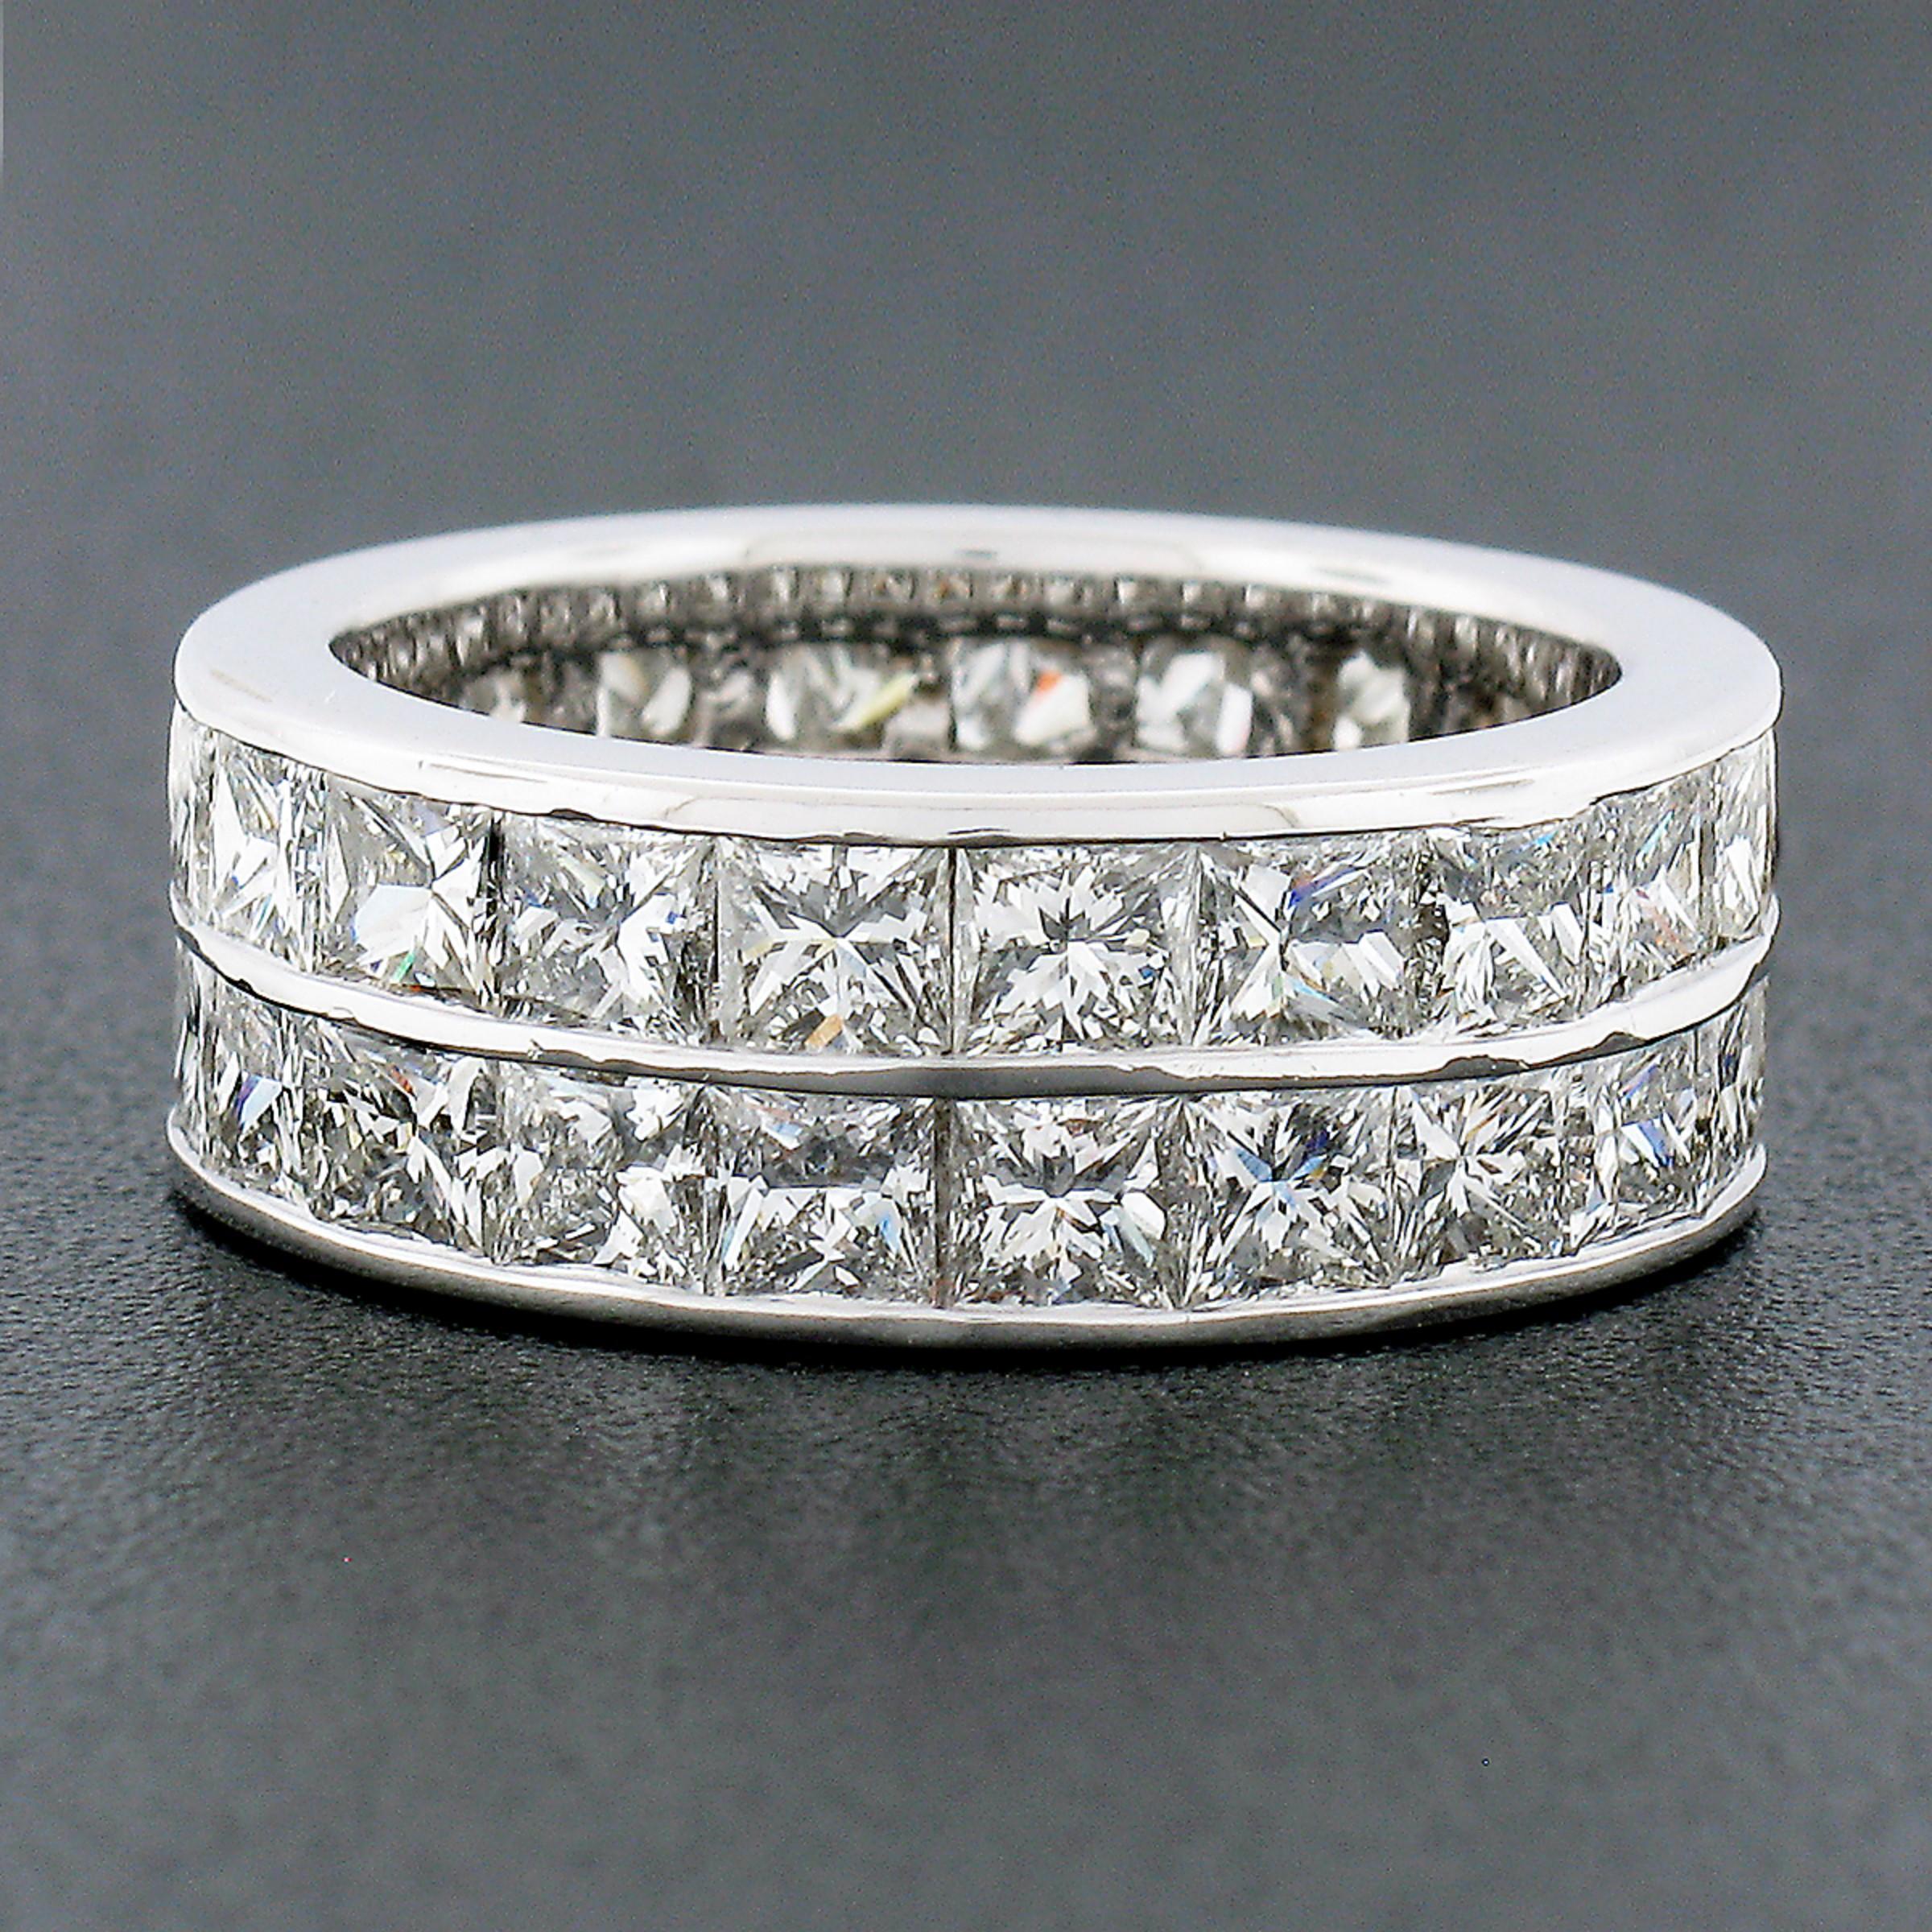 Here we have an absolutely gorgeous diamond eternity band ring crafted from solid 14k white gold. The wide band features 44, very fine quality, princess square cut diamonds, totaling approximately 6 carats in weight, that are perfectly channel set